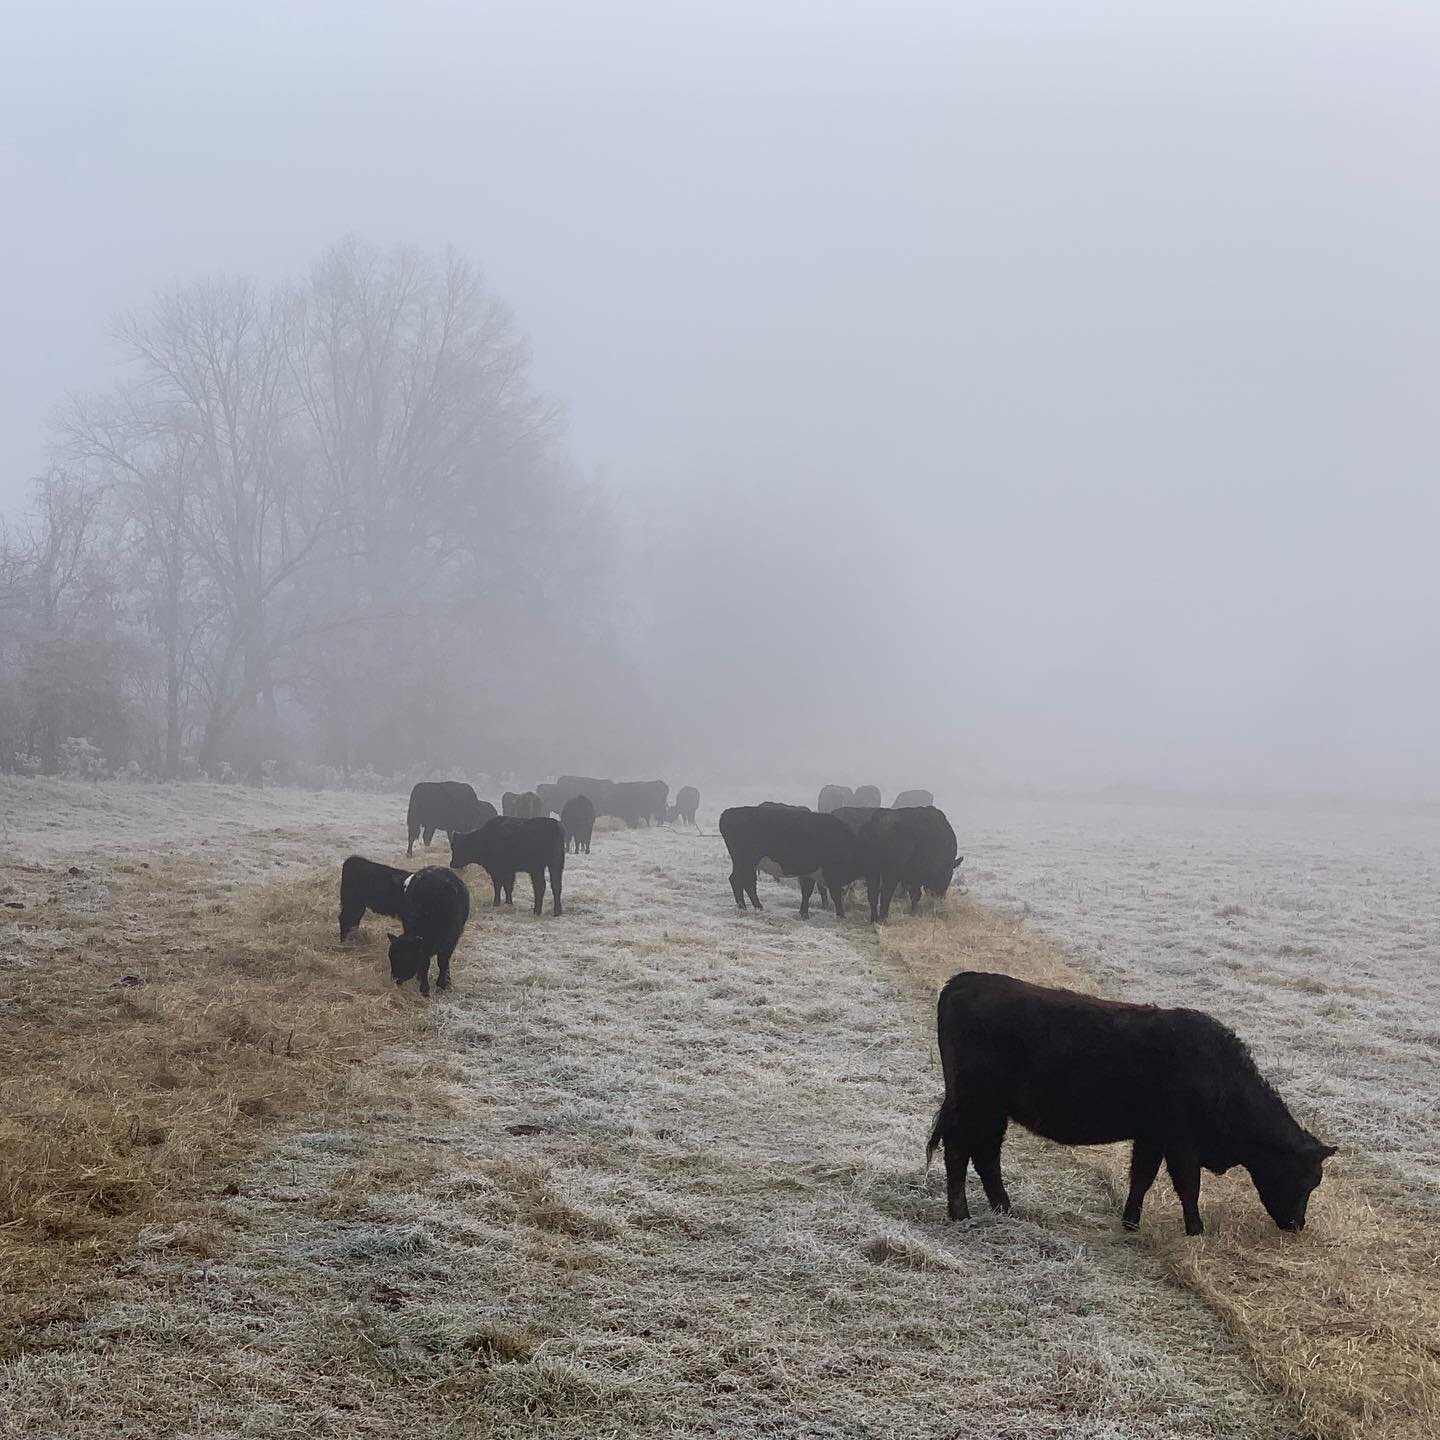 The fog always brings a calmness to the farm. I think our animals feel it too. #nofilterneeded